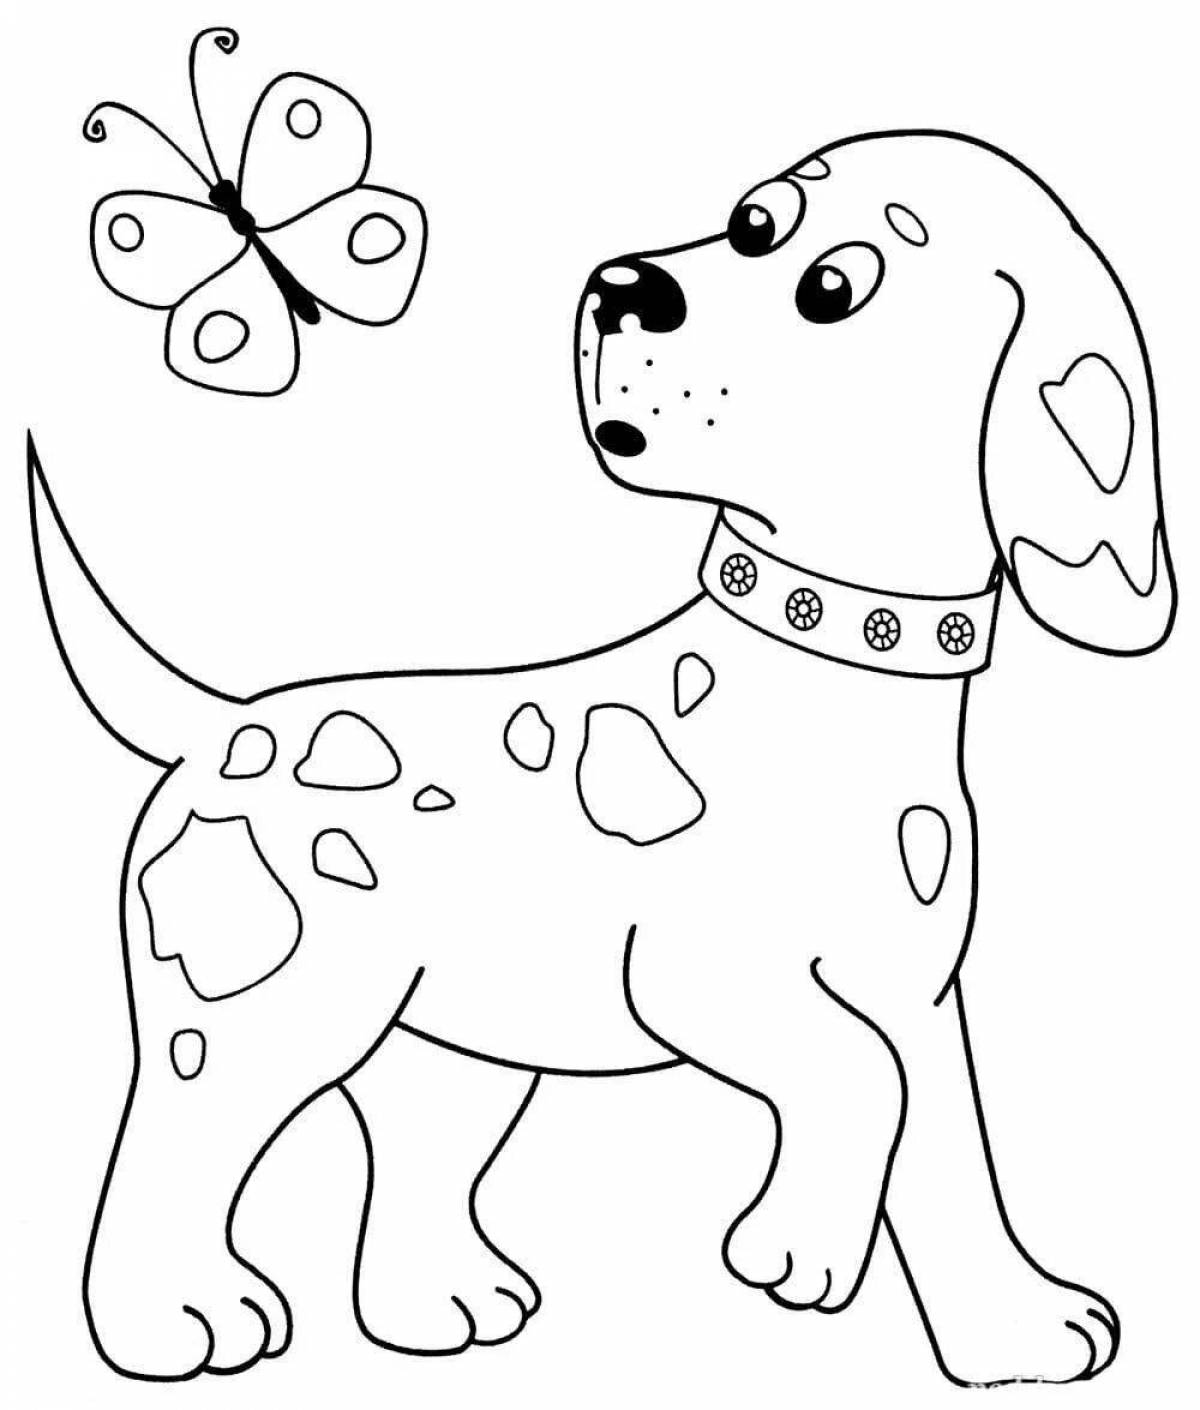 Fun coloring book for boys and dogs